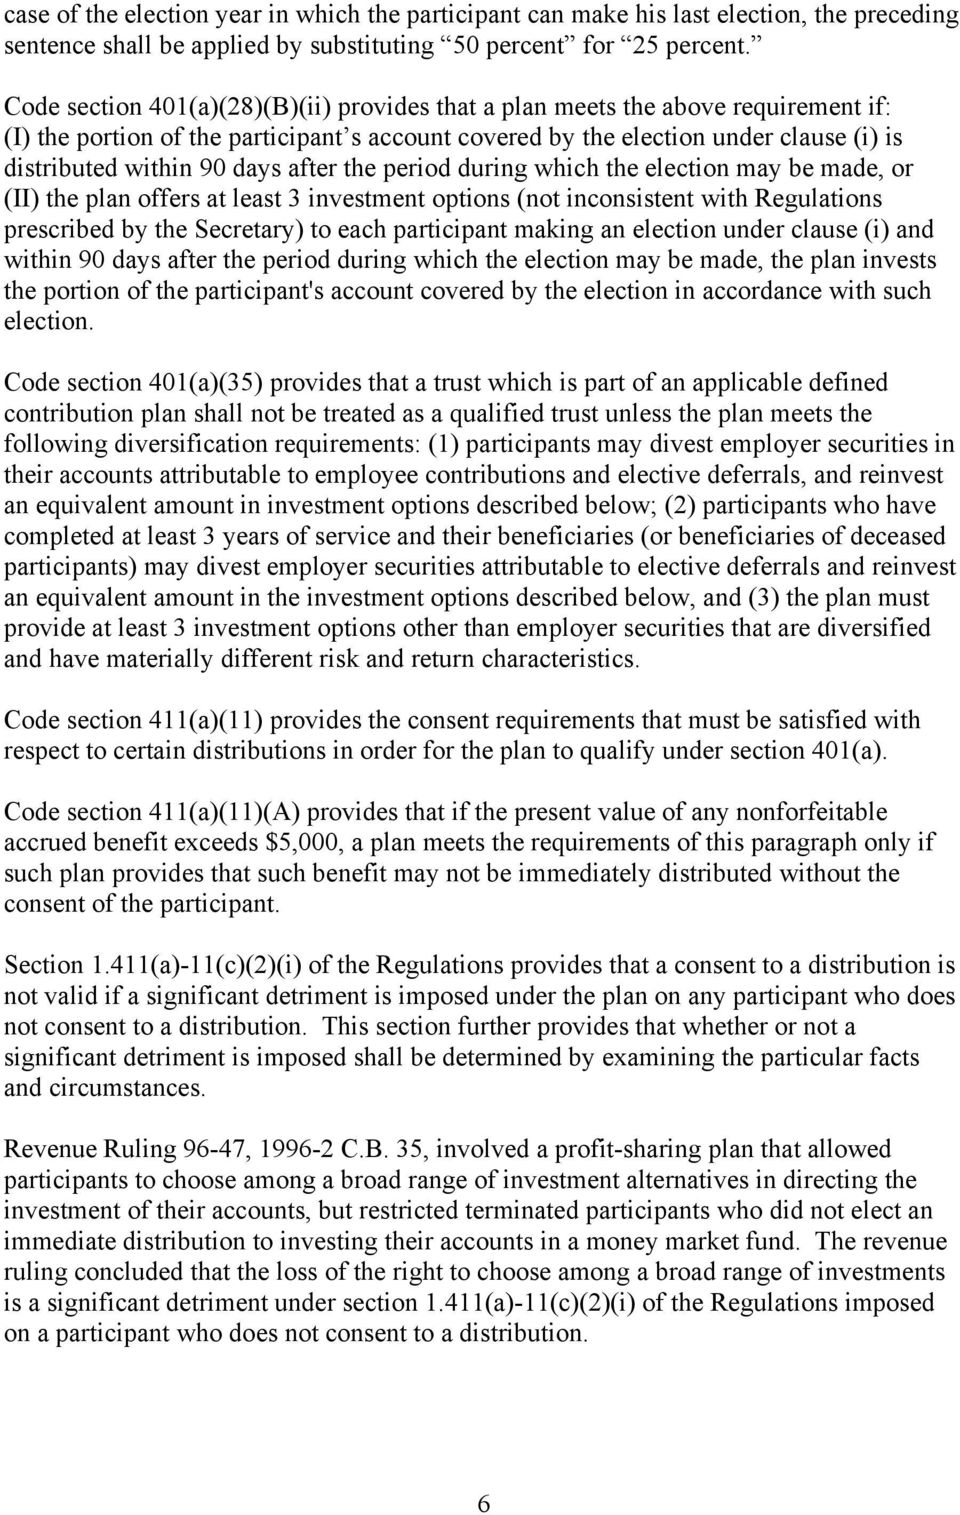 after the period during which the election may be made, or (II) the plan offers at least 3 investment options (not inconsistent with Regulations prescribed by the Secretary) to each participant